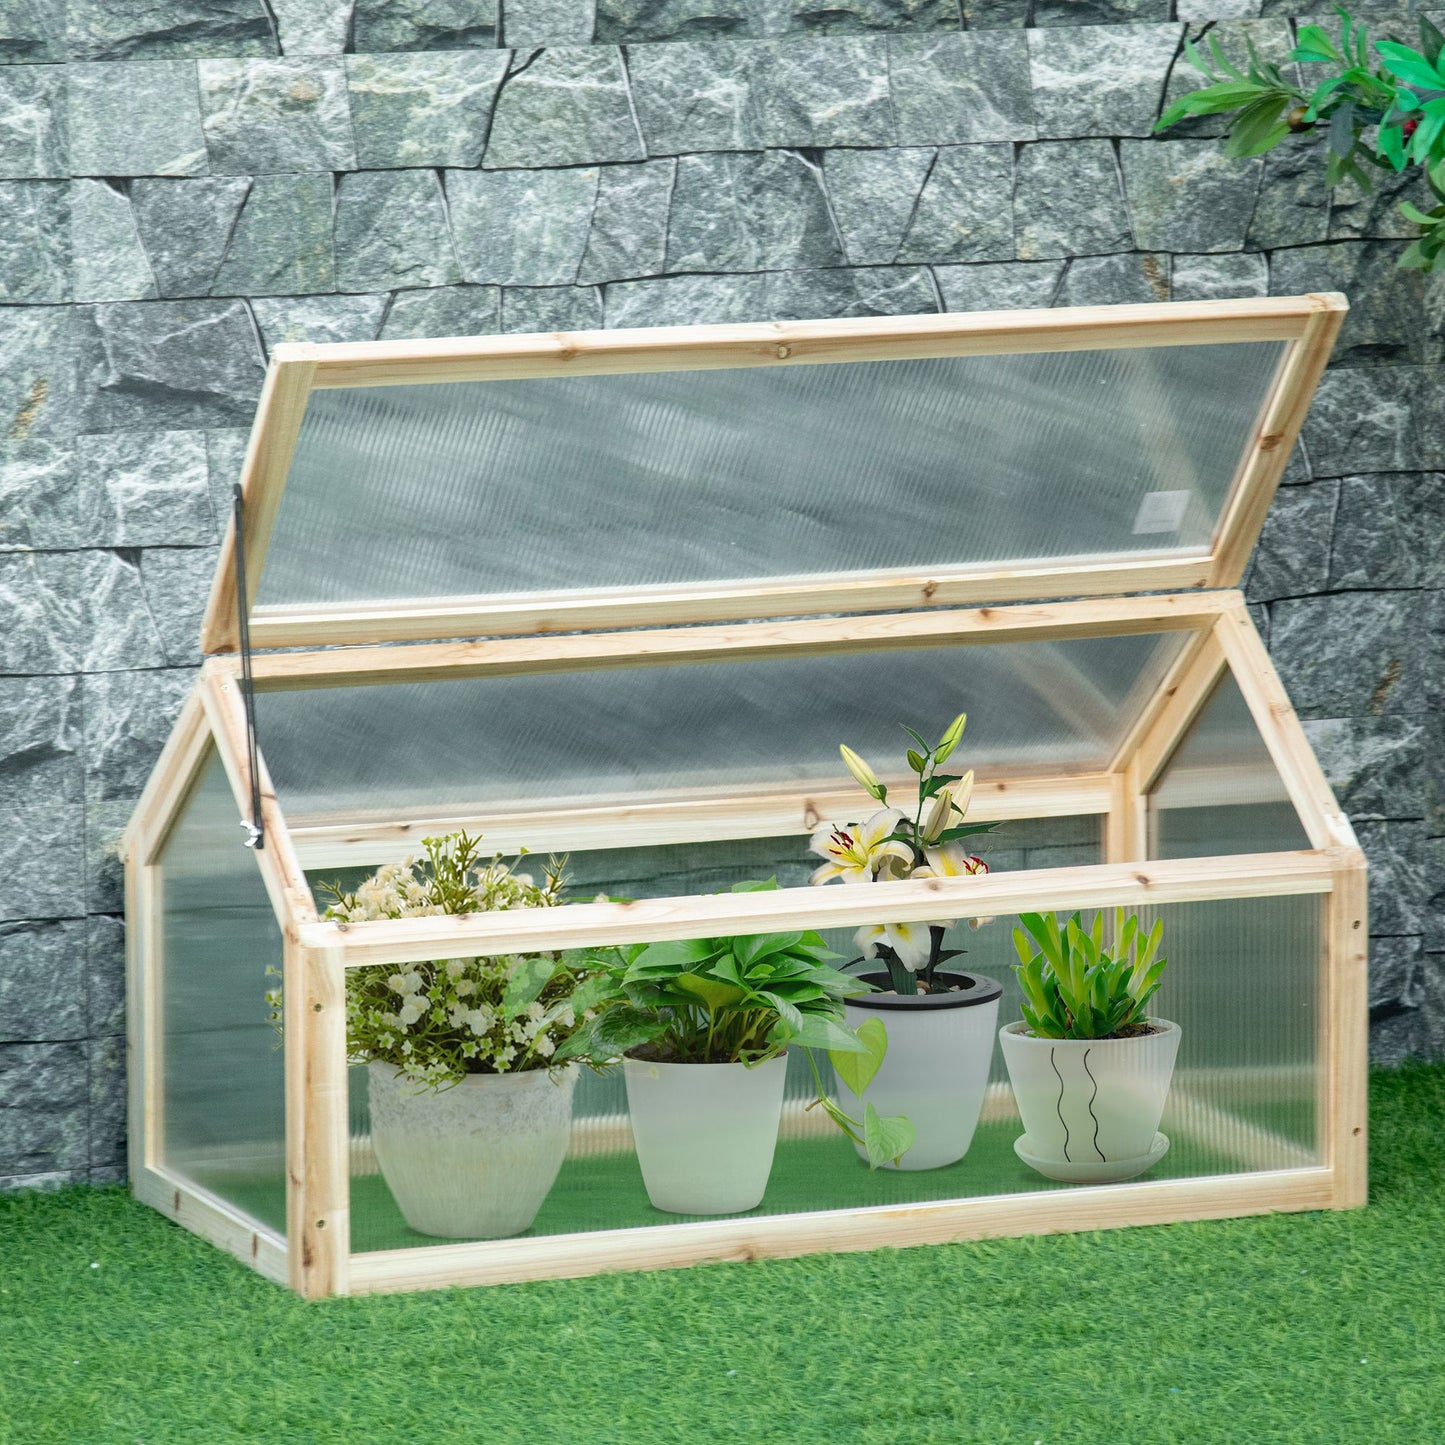 Outsunny Wooden Cold Frame Greenhouse Garden Polycarbonate Grow House with Openable Top for Flowers, Vegetables, Plants, 90 x 52 x 50cm, Natural